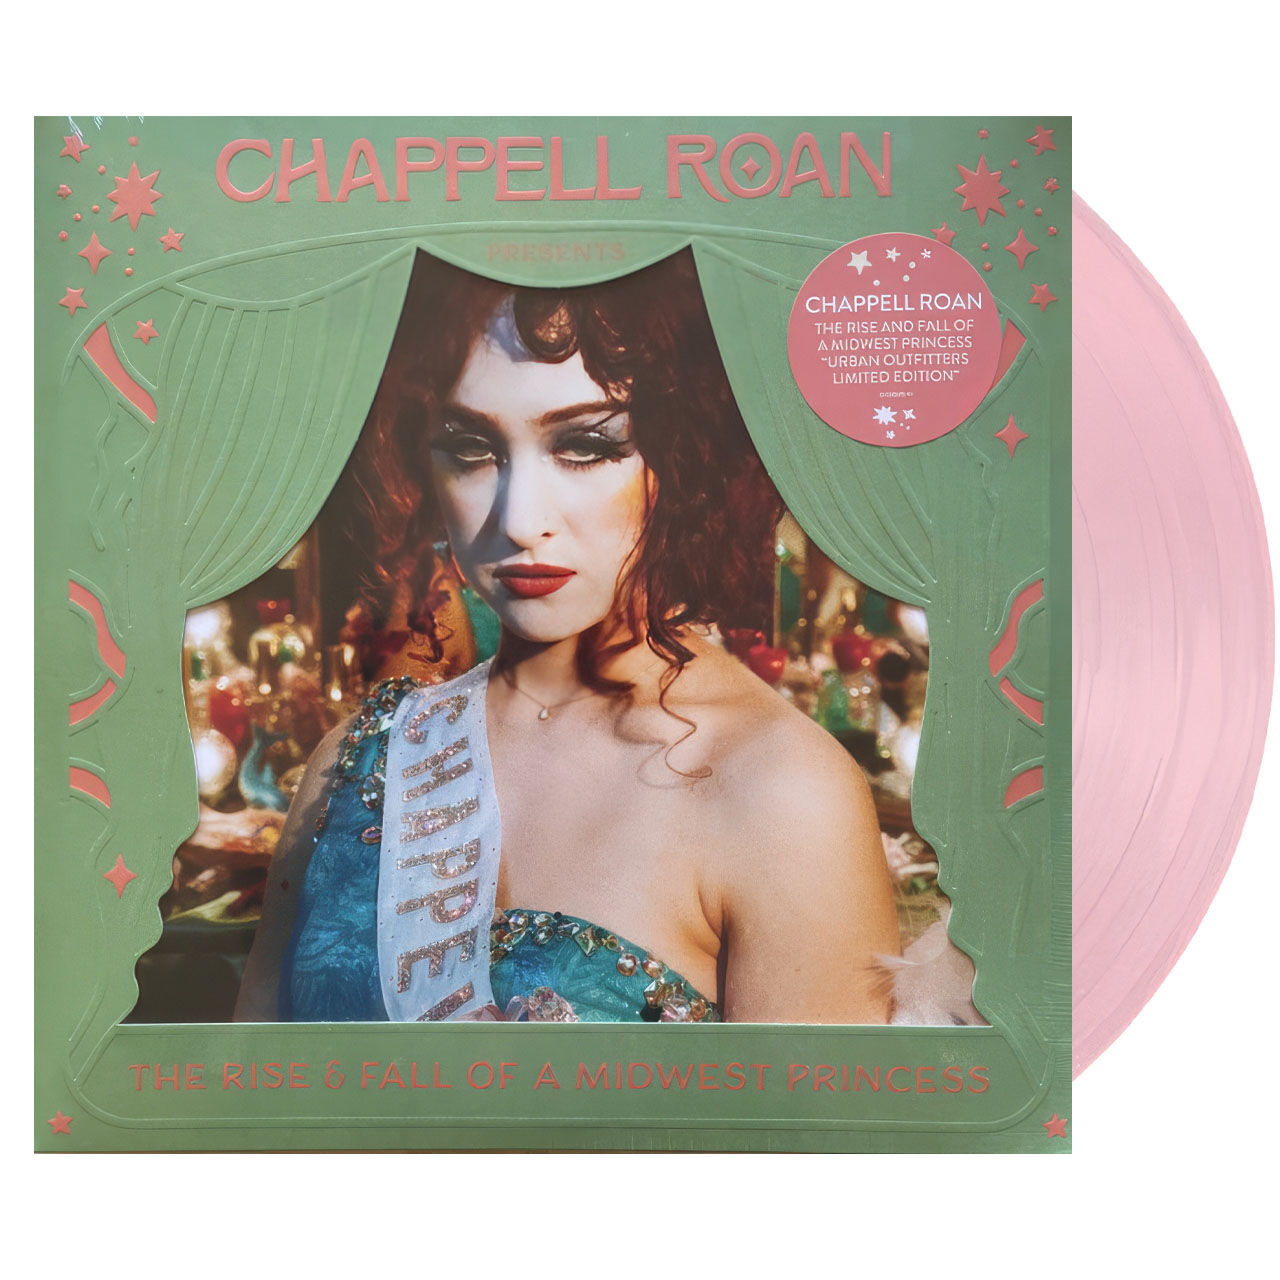 CHAPPELL ROAN The Rise And Fall of a Midwest Princess Deluxe UO Pink 2LP Vinyl